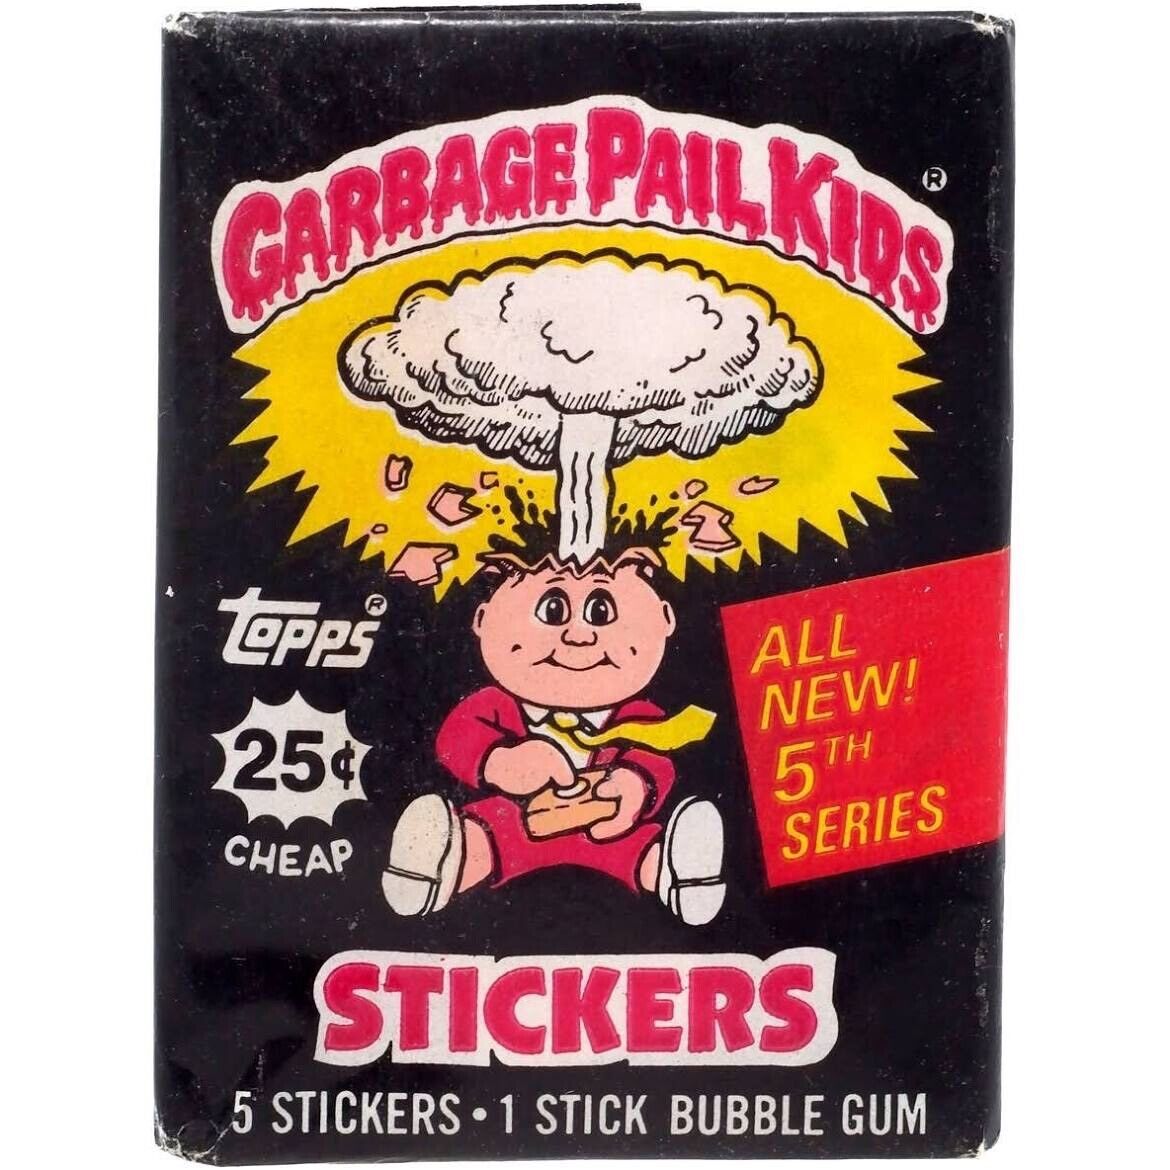 Topps 1986 5 Series Garbage Pail Kids OS5 U PICK Your card To complete GPK Set